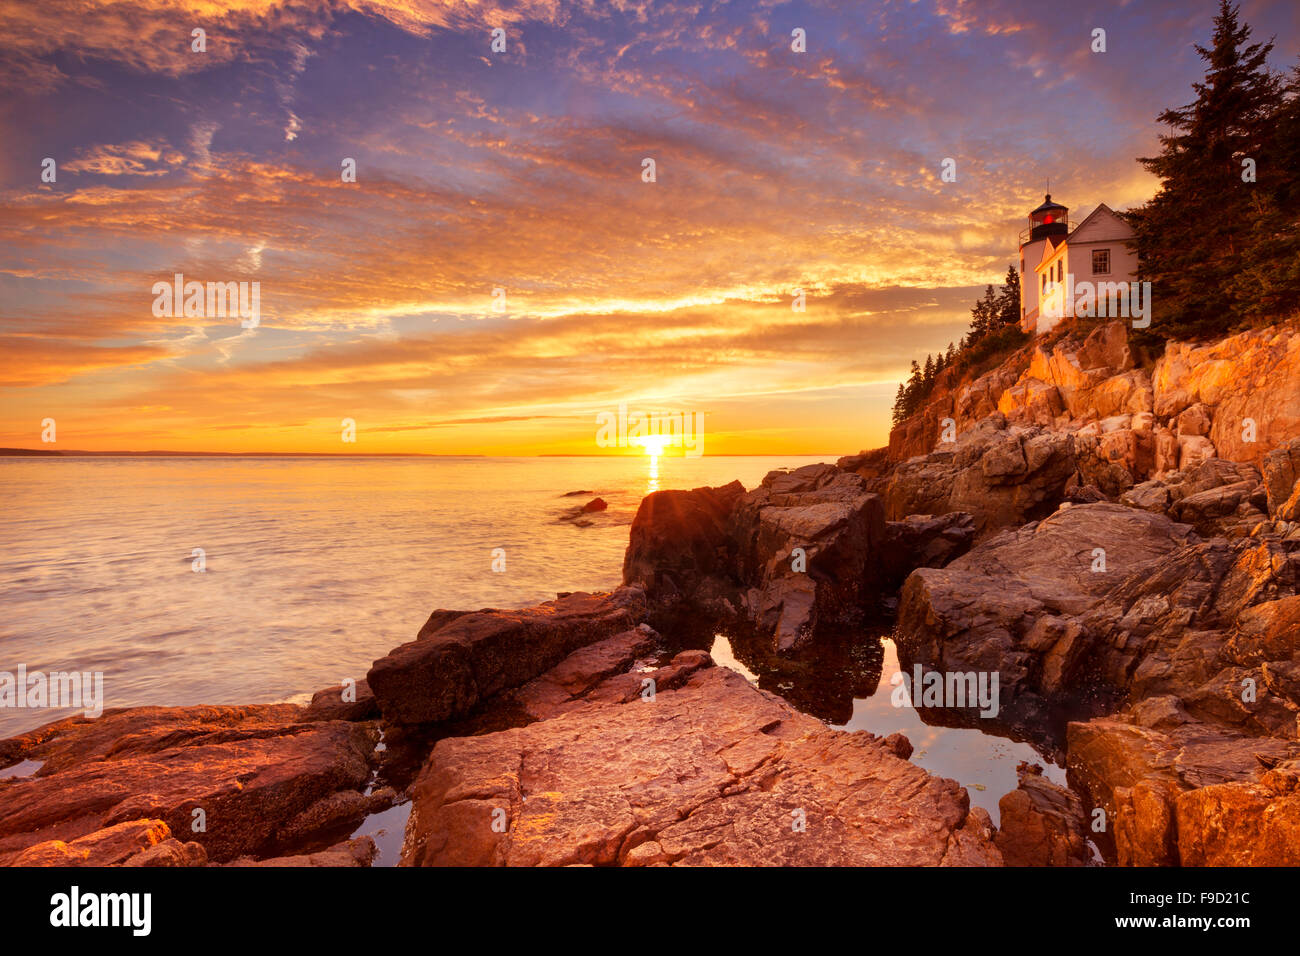 The Bass Harbor Head Lighthouse in Acadia National Park, Maine, USA. Photographed during a spectacular sunset. Stock Photo